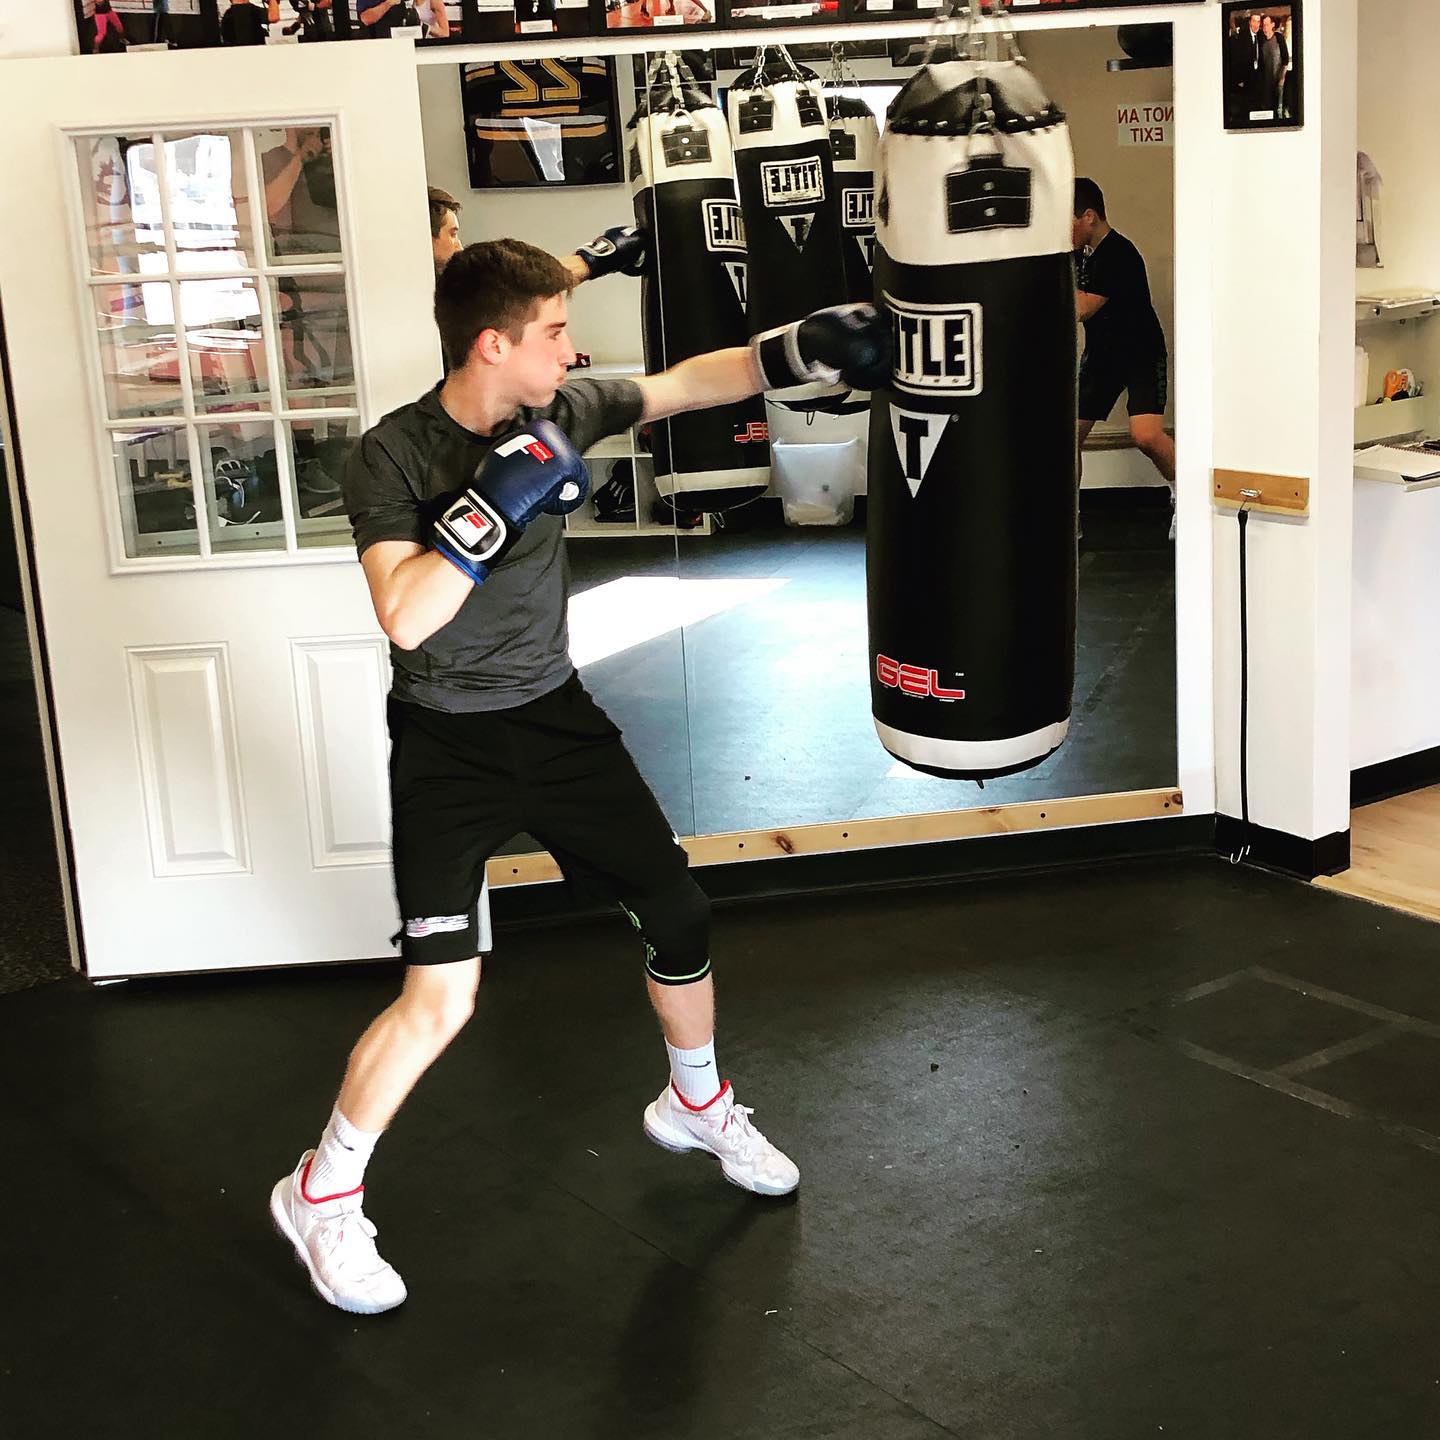 With no youth and high school sports going on what better way to keep that young athlete in shape then Boxing . Contact us for more information on trying out a free boxing session at call/text (781)727-9503 or email fitbox@outlook.com . @jbmcinerney_